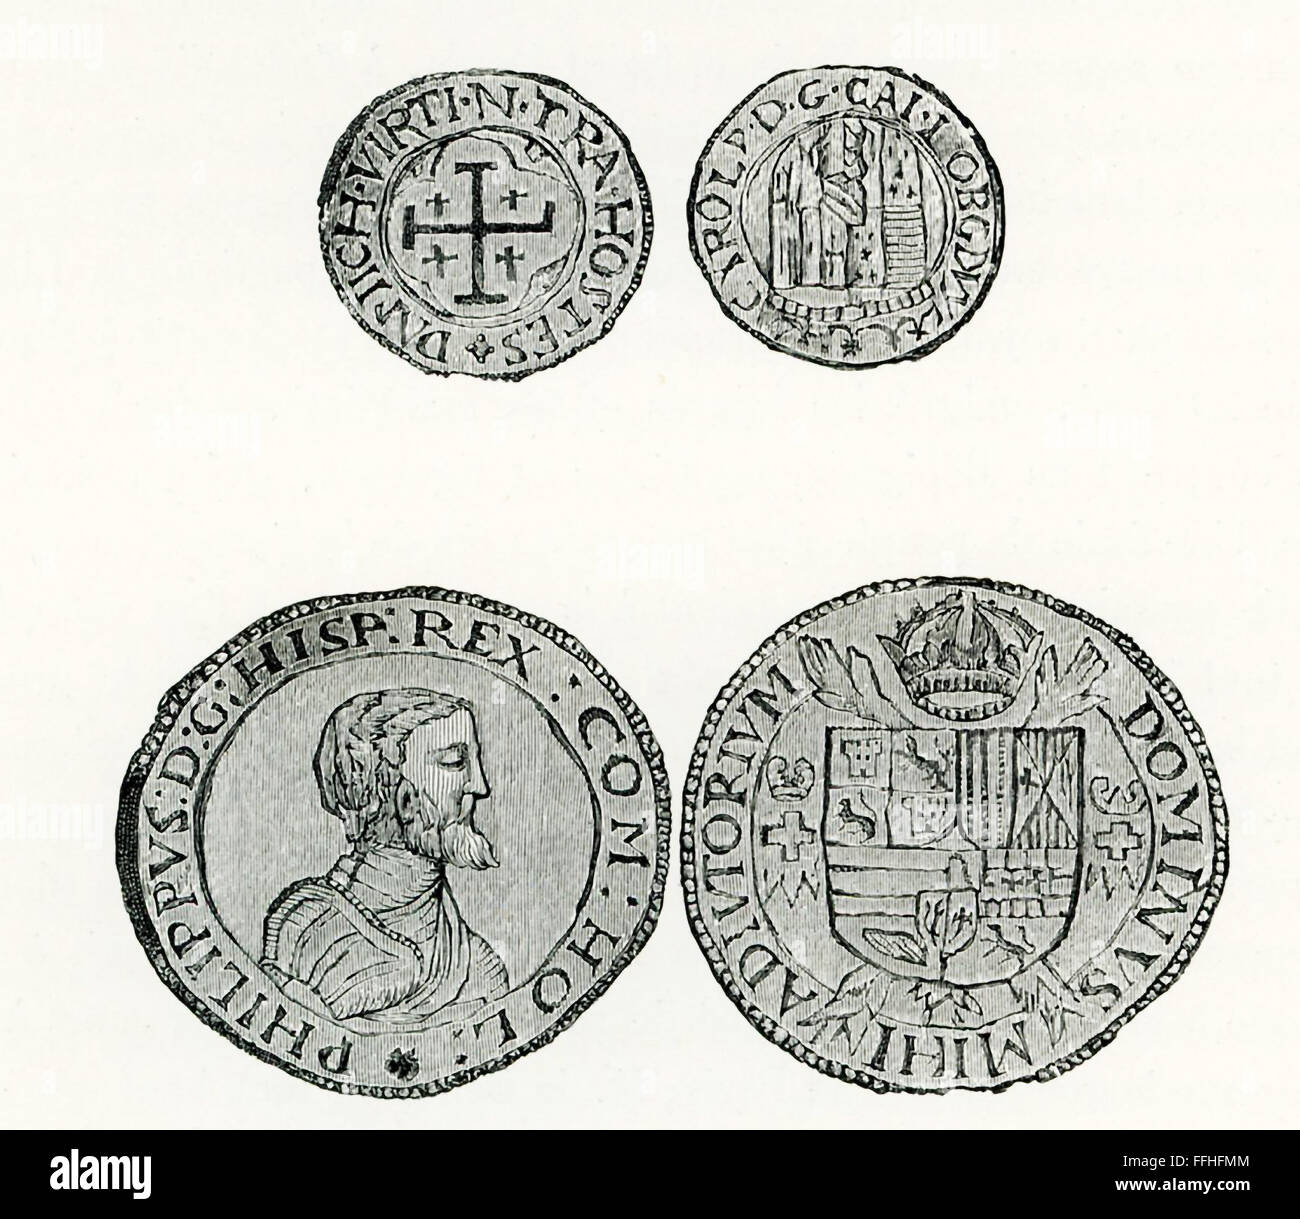 Shown here are late 1800s engravings of Spanish doubloons. The portrait here is Philip II of Spain. He ruled Spain from 1556 to 1598 and Portugal from 1581 to 1598. As the husband of Queen Mary of England, he was king of England and Ireland 1544-1588. Philip was the ruler responsible for the Spanish Armada. Doubloons were monetary gold coins minted in Spain, Mexico, Peru, and Nueva Grande. Stock Photo